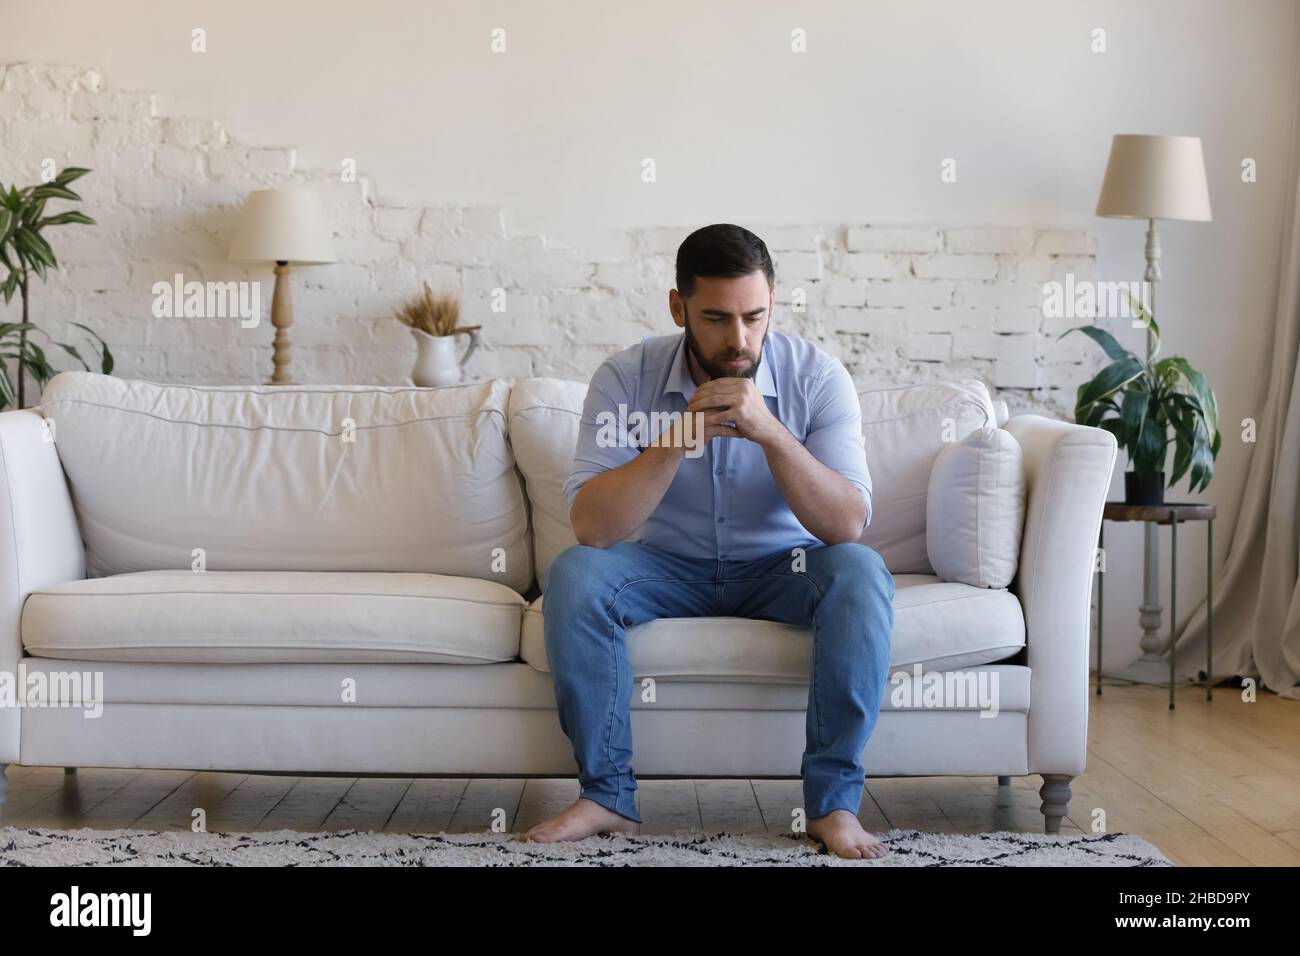 Pensive unhappy young man suffering from problems. Stock Photo